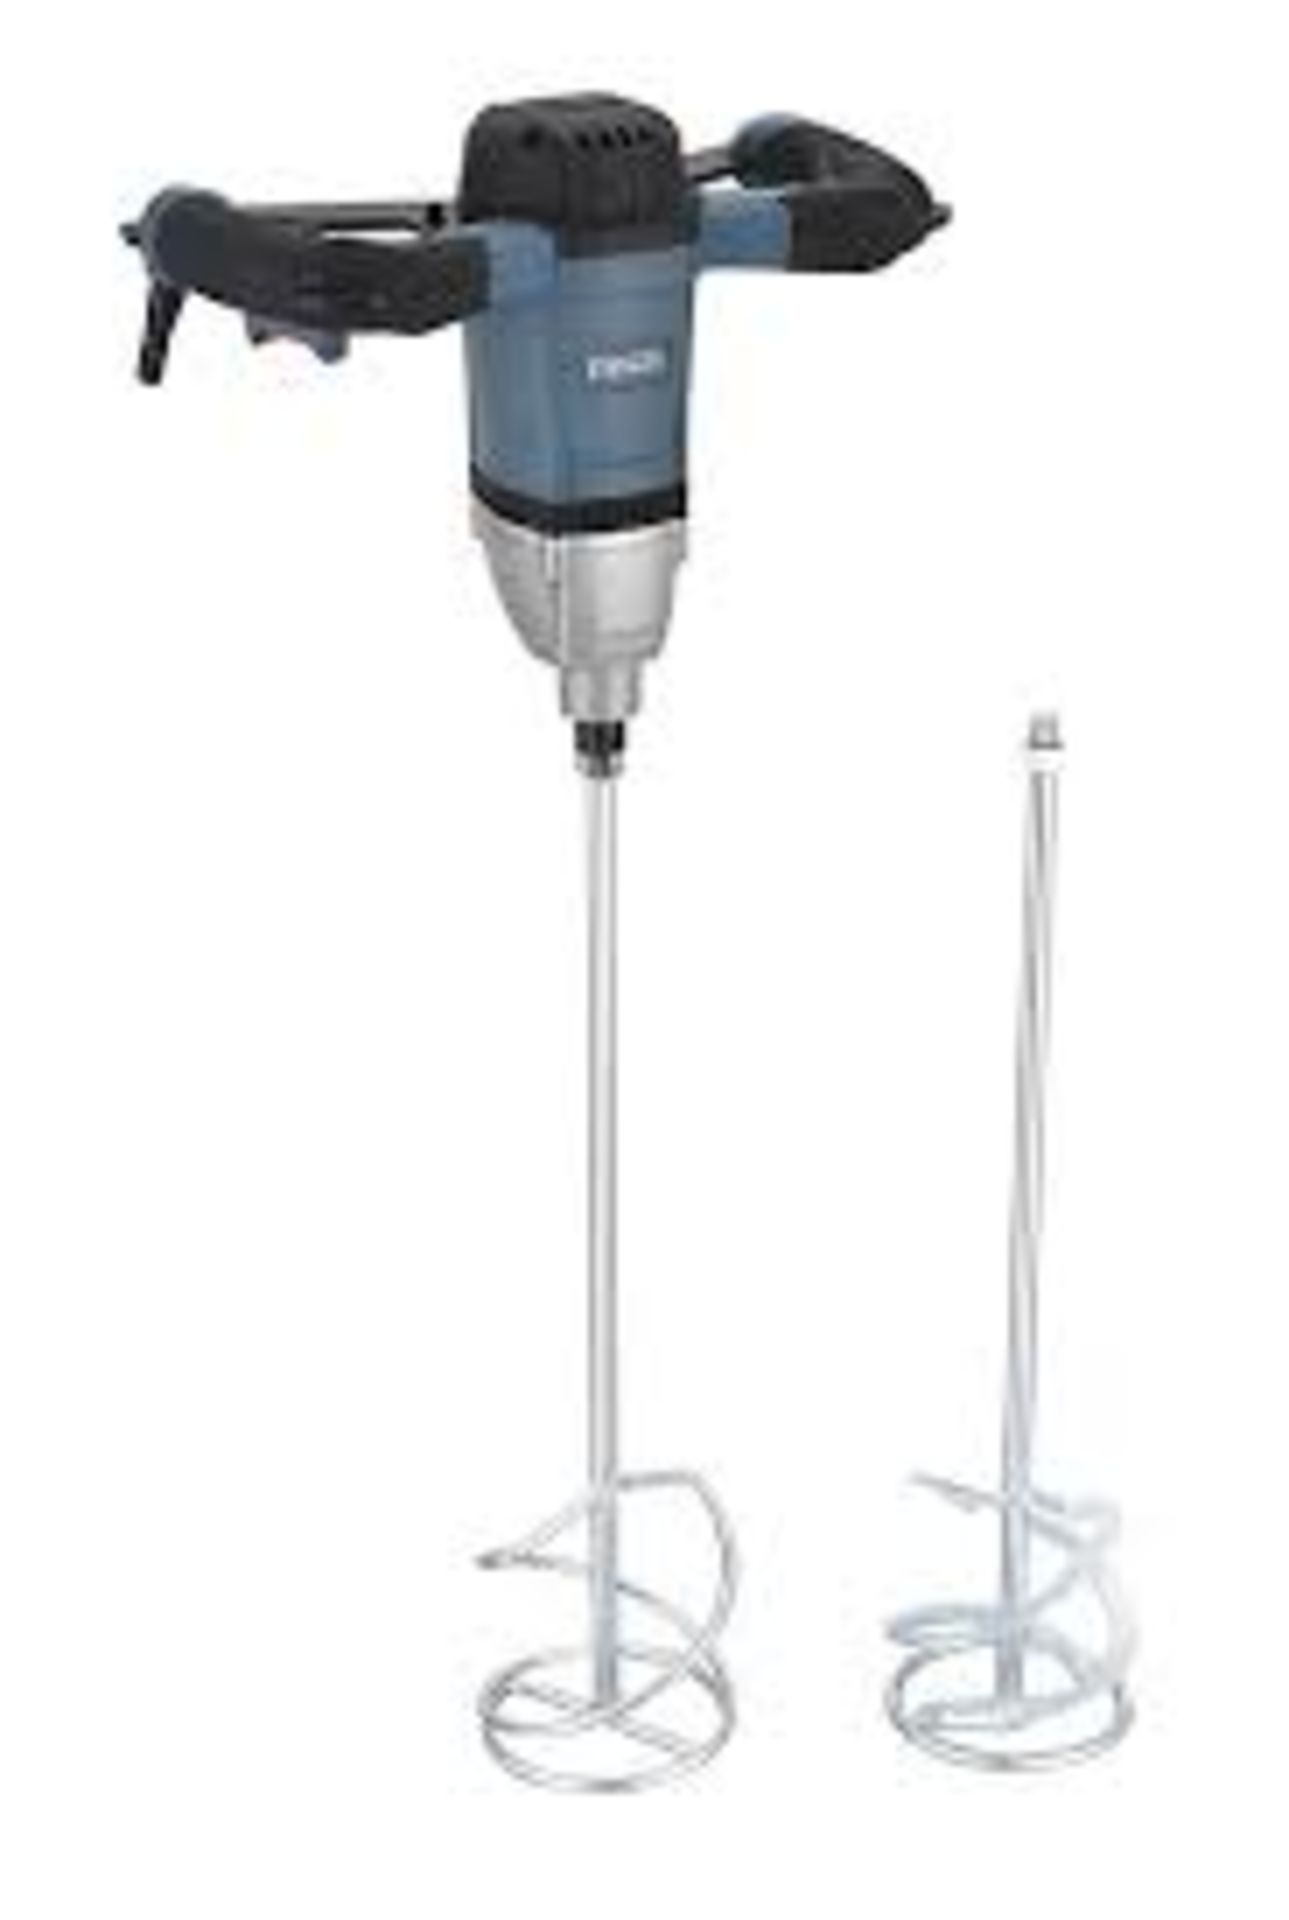 Erbauer 1600W 240V Corded Paddle mixer EPM1600. - P3. Powerful and durable paddle mixer with 120L